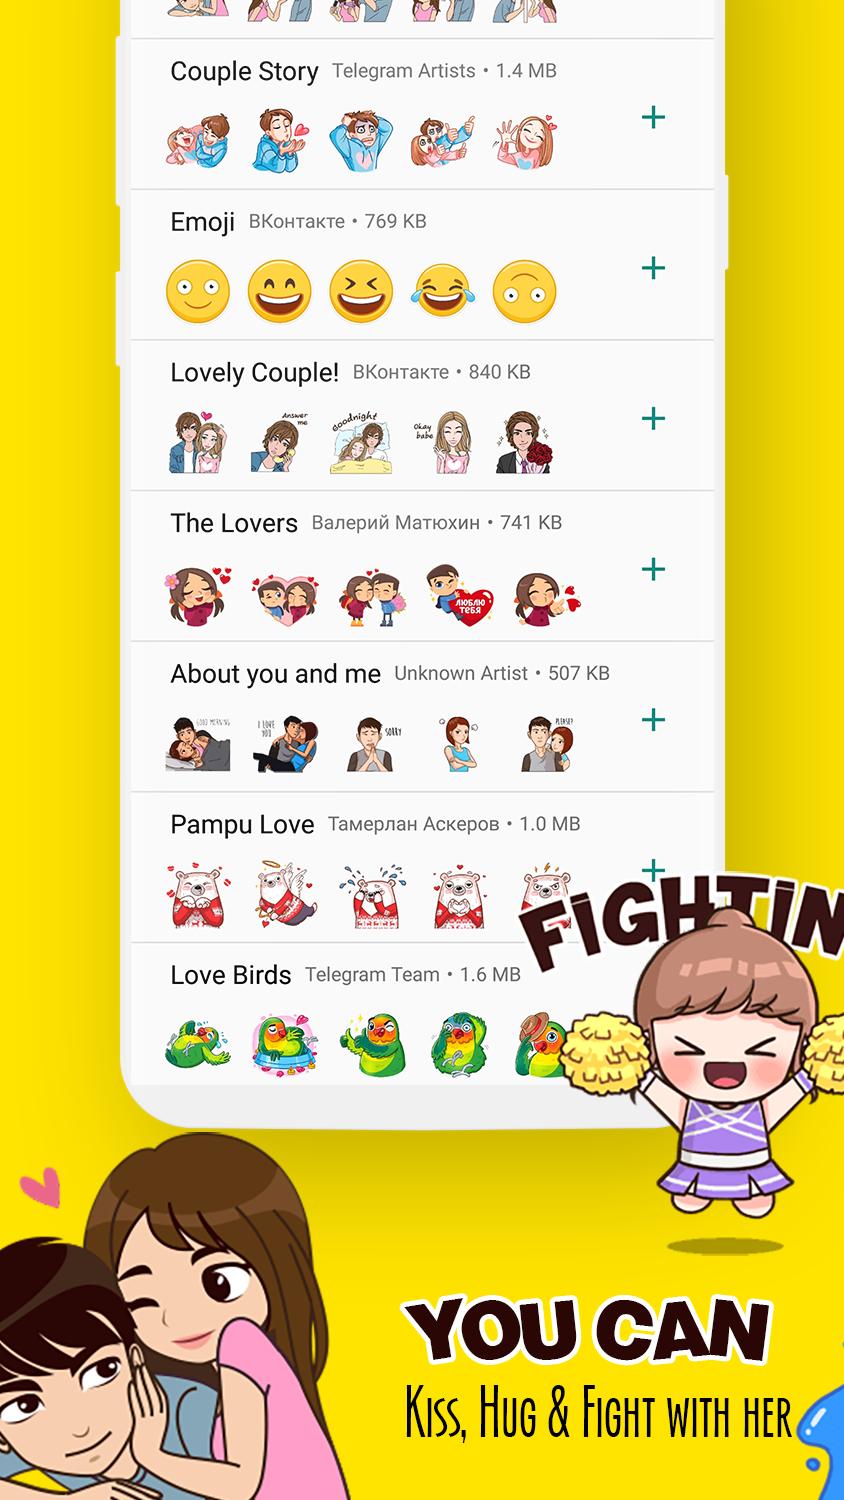 Wastickerapps Love Sticker Pack For Whatsapp For Android Apk